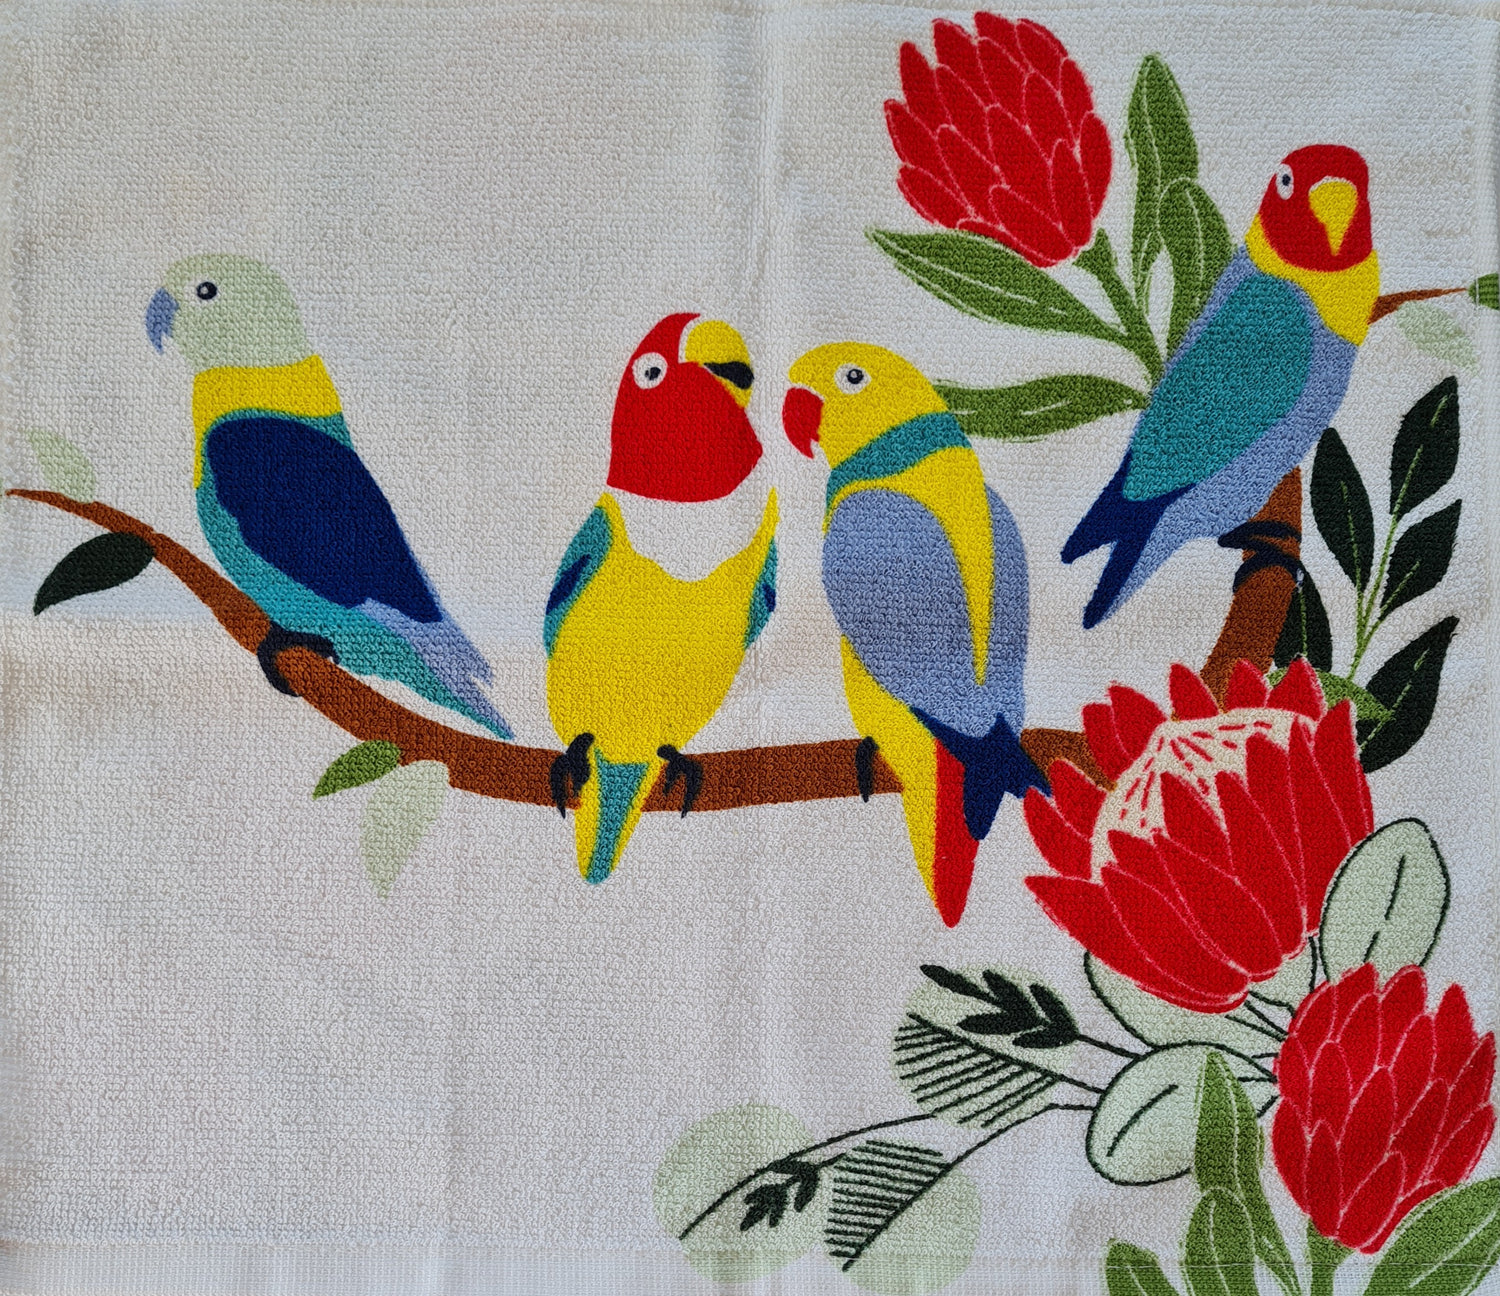 Crochet topped hanging kitchen hand towel -Parrots on a branch